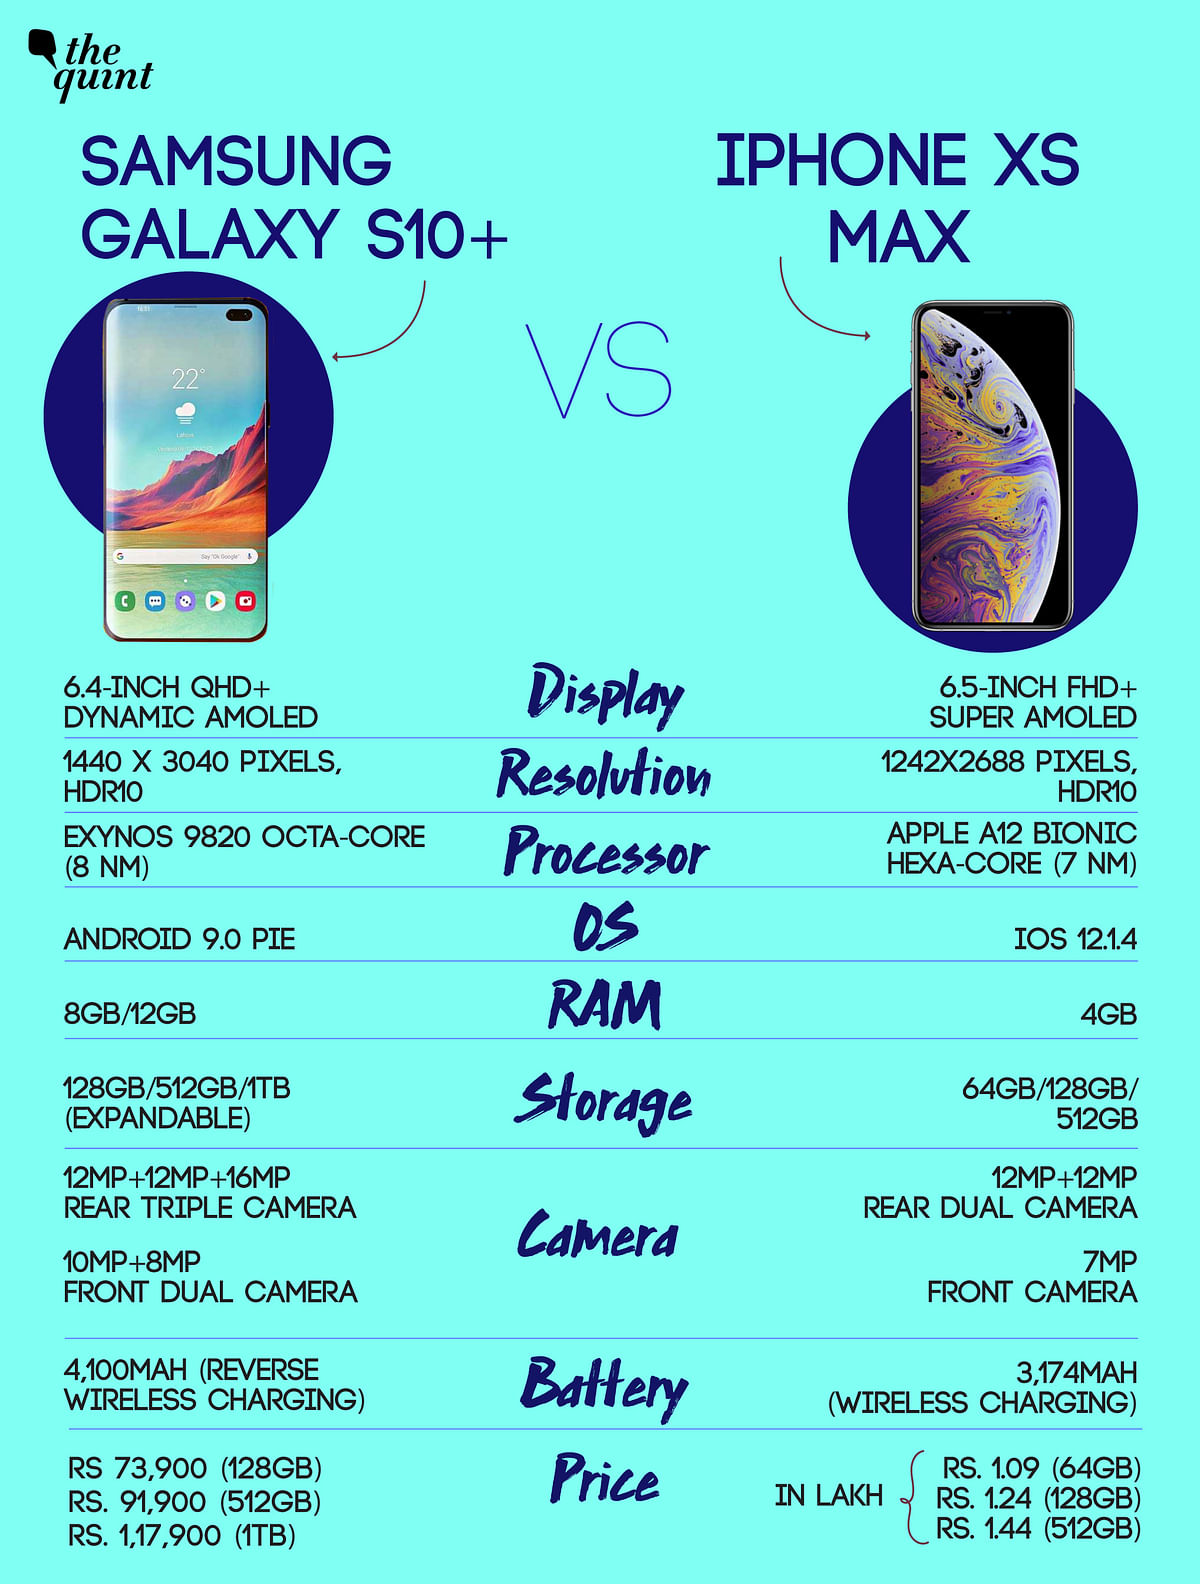 Samsung Galaxy S10+ versus iPhone XS Max: Which is the better flagship phone over Rs 50,000? Here’s a look.